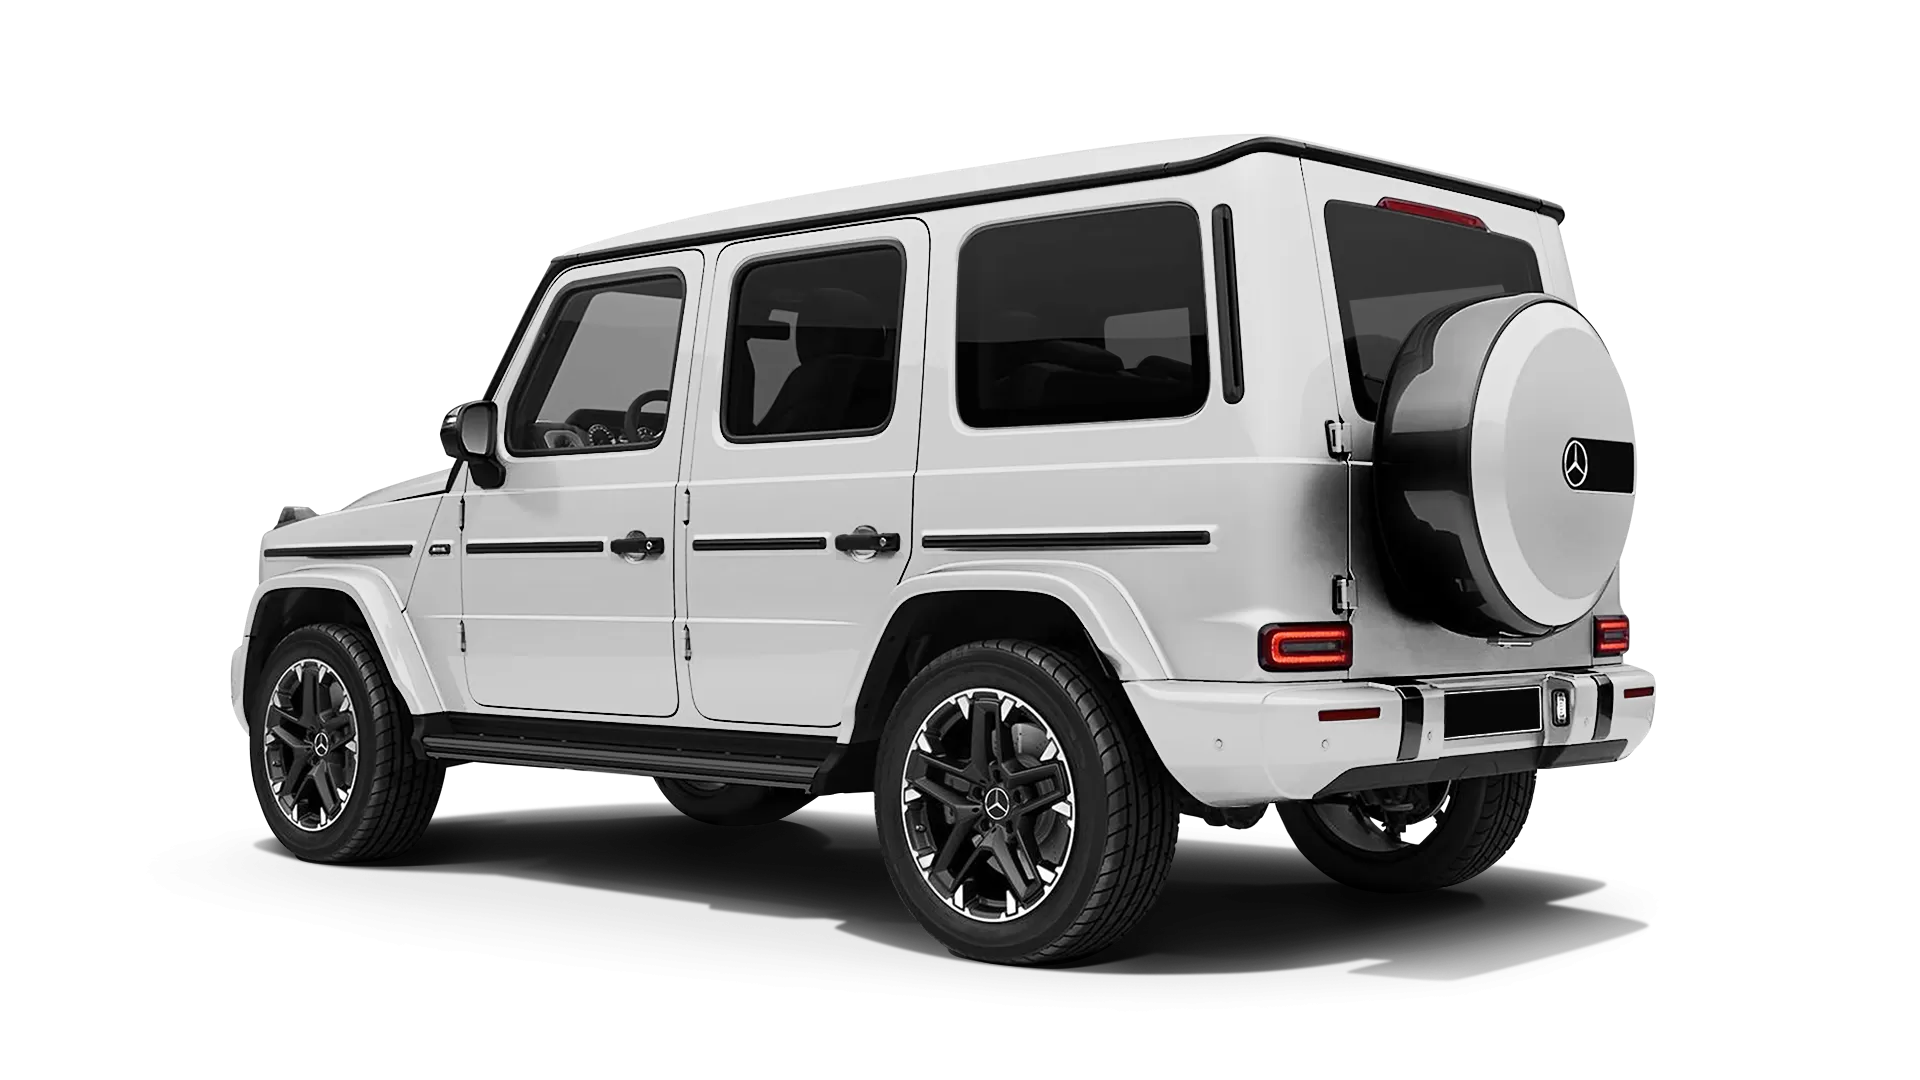 Mercedes G class W463 stock rear view in Polar White color